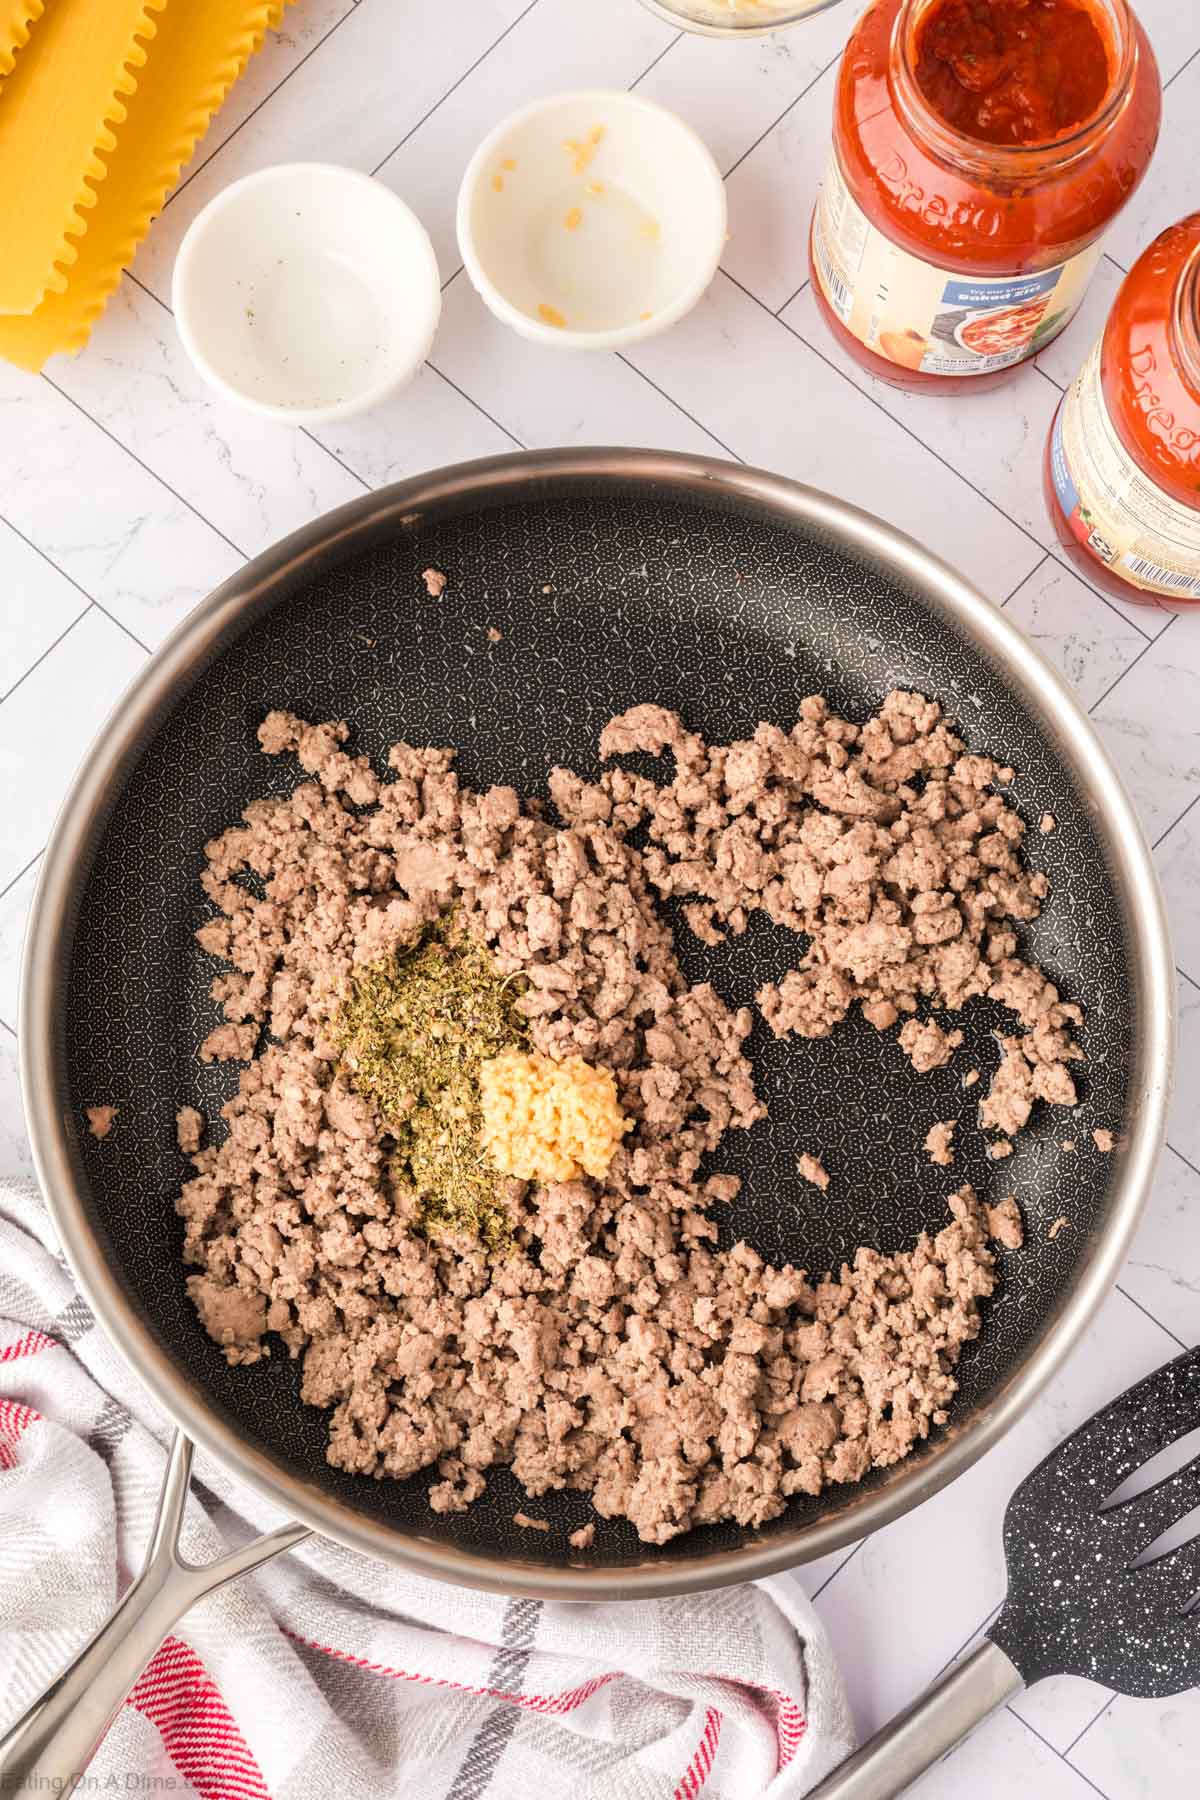 Adding the seasoning in the ground beef in the skillet